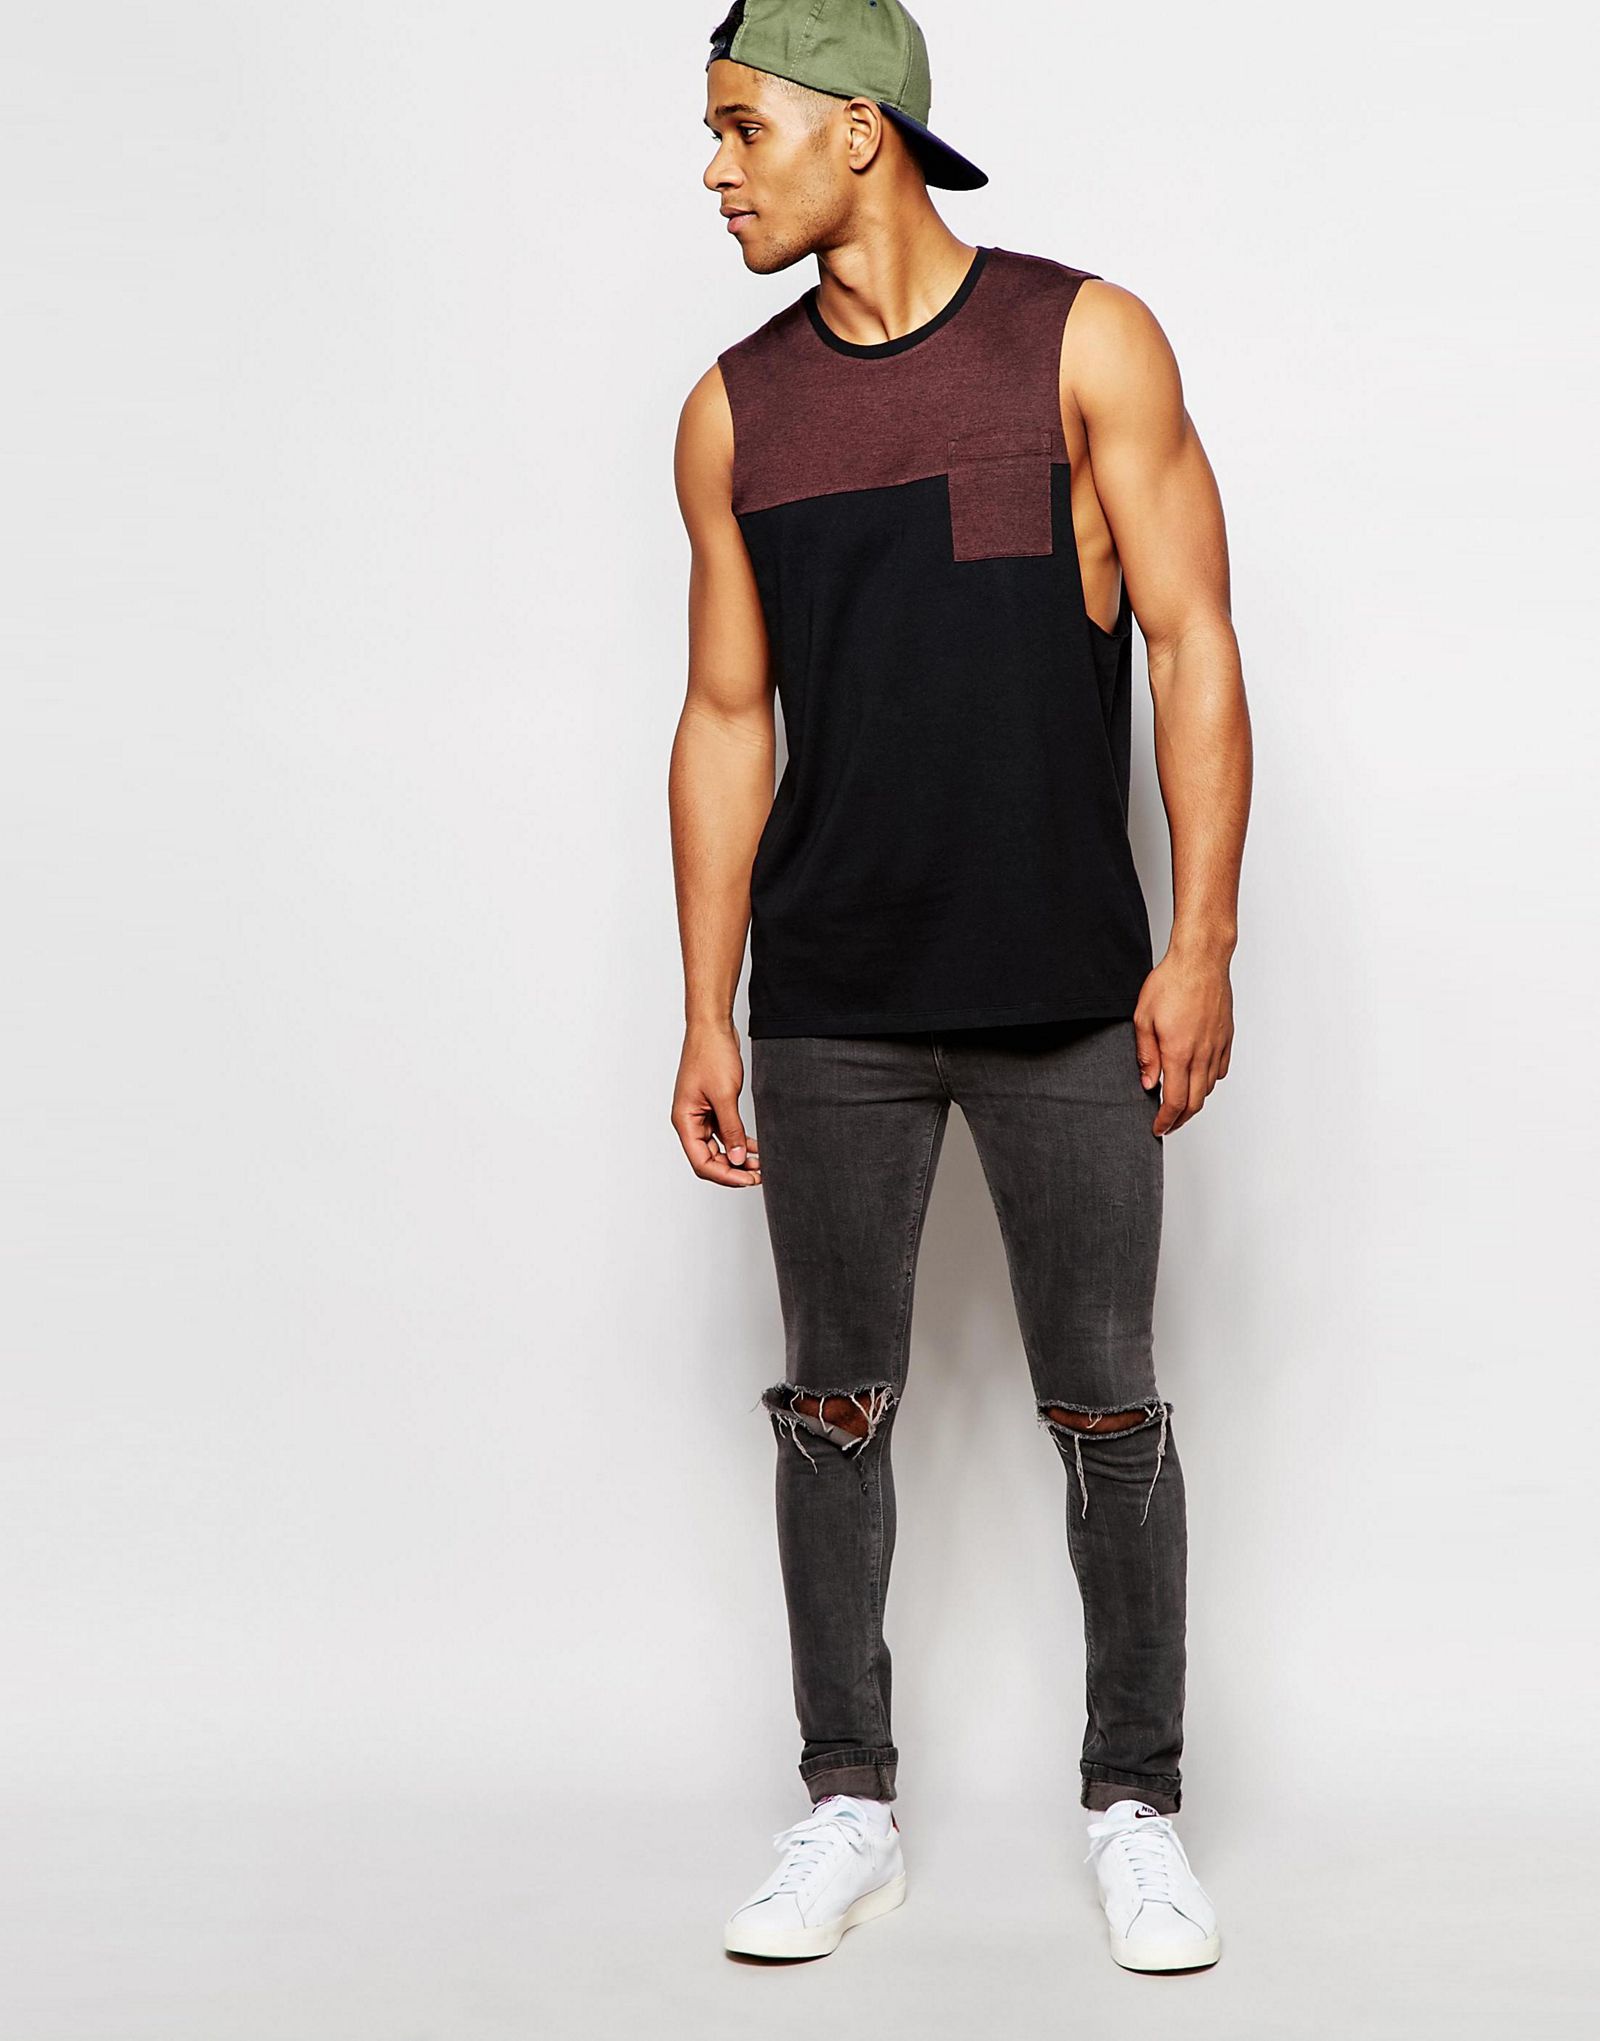 ASOS Sleeveless T-Shirt With Contras Yoke In Black/Oxblood